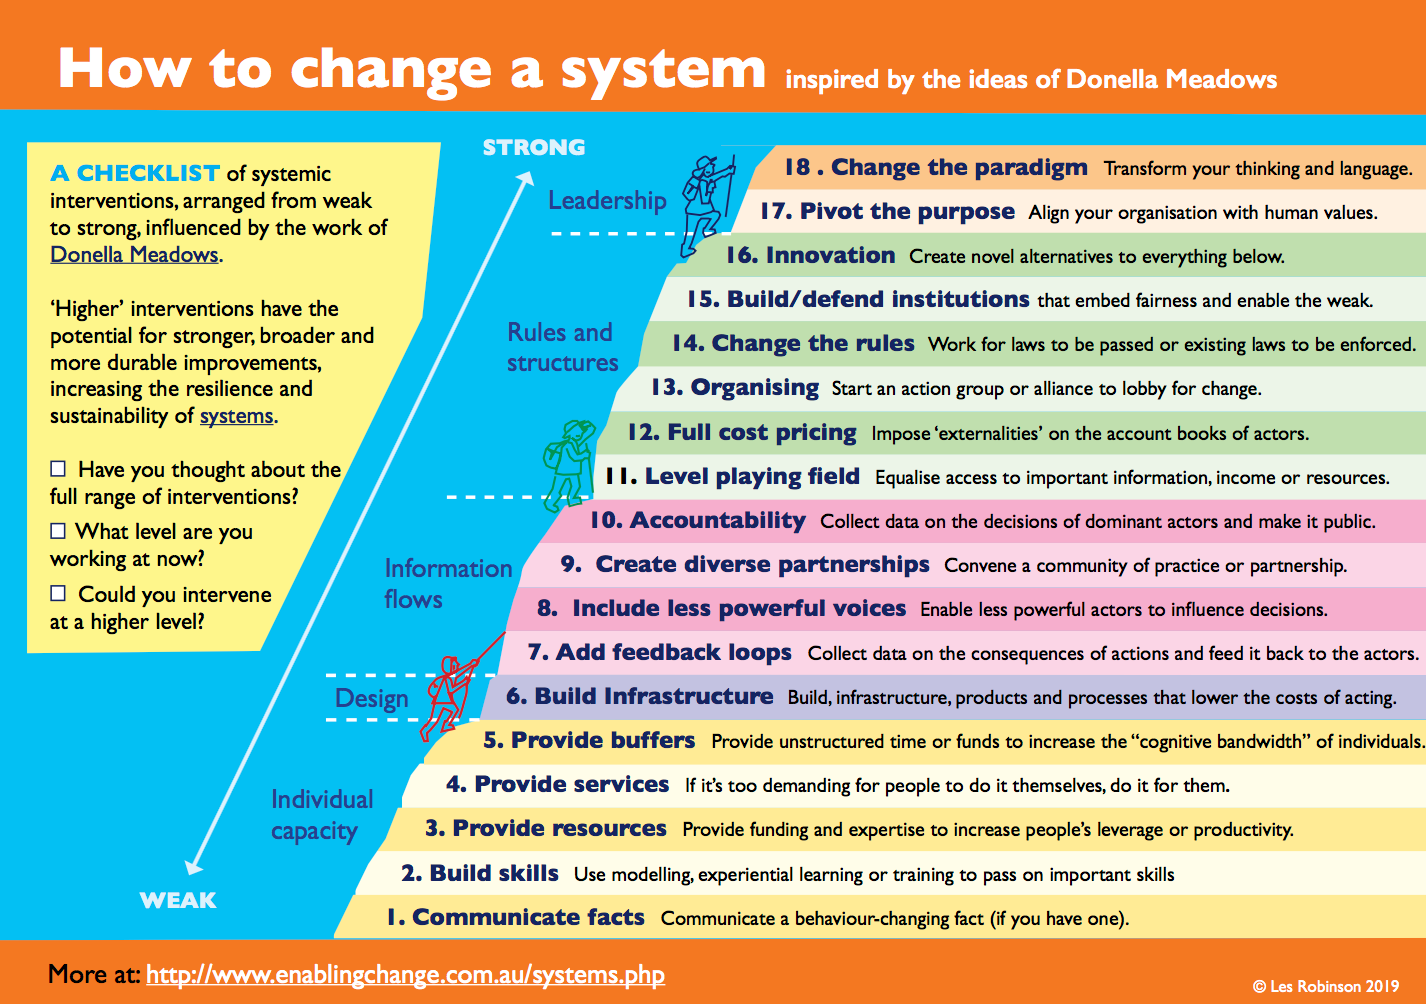 'How to change a system' table/flowchart